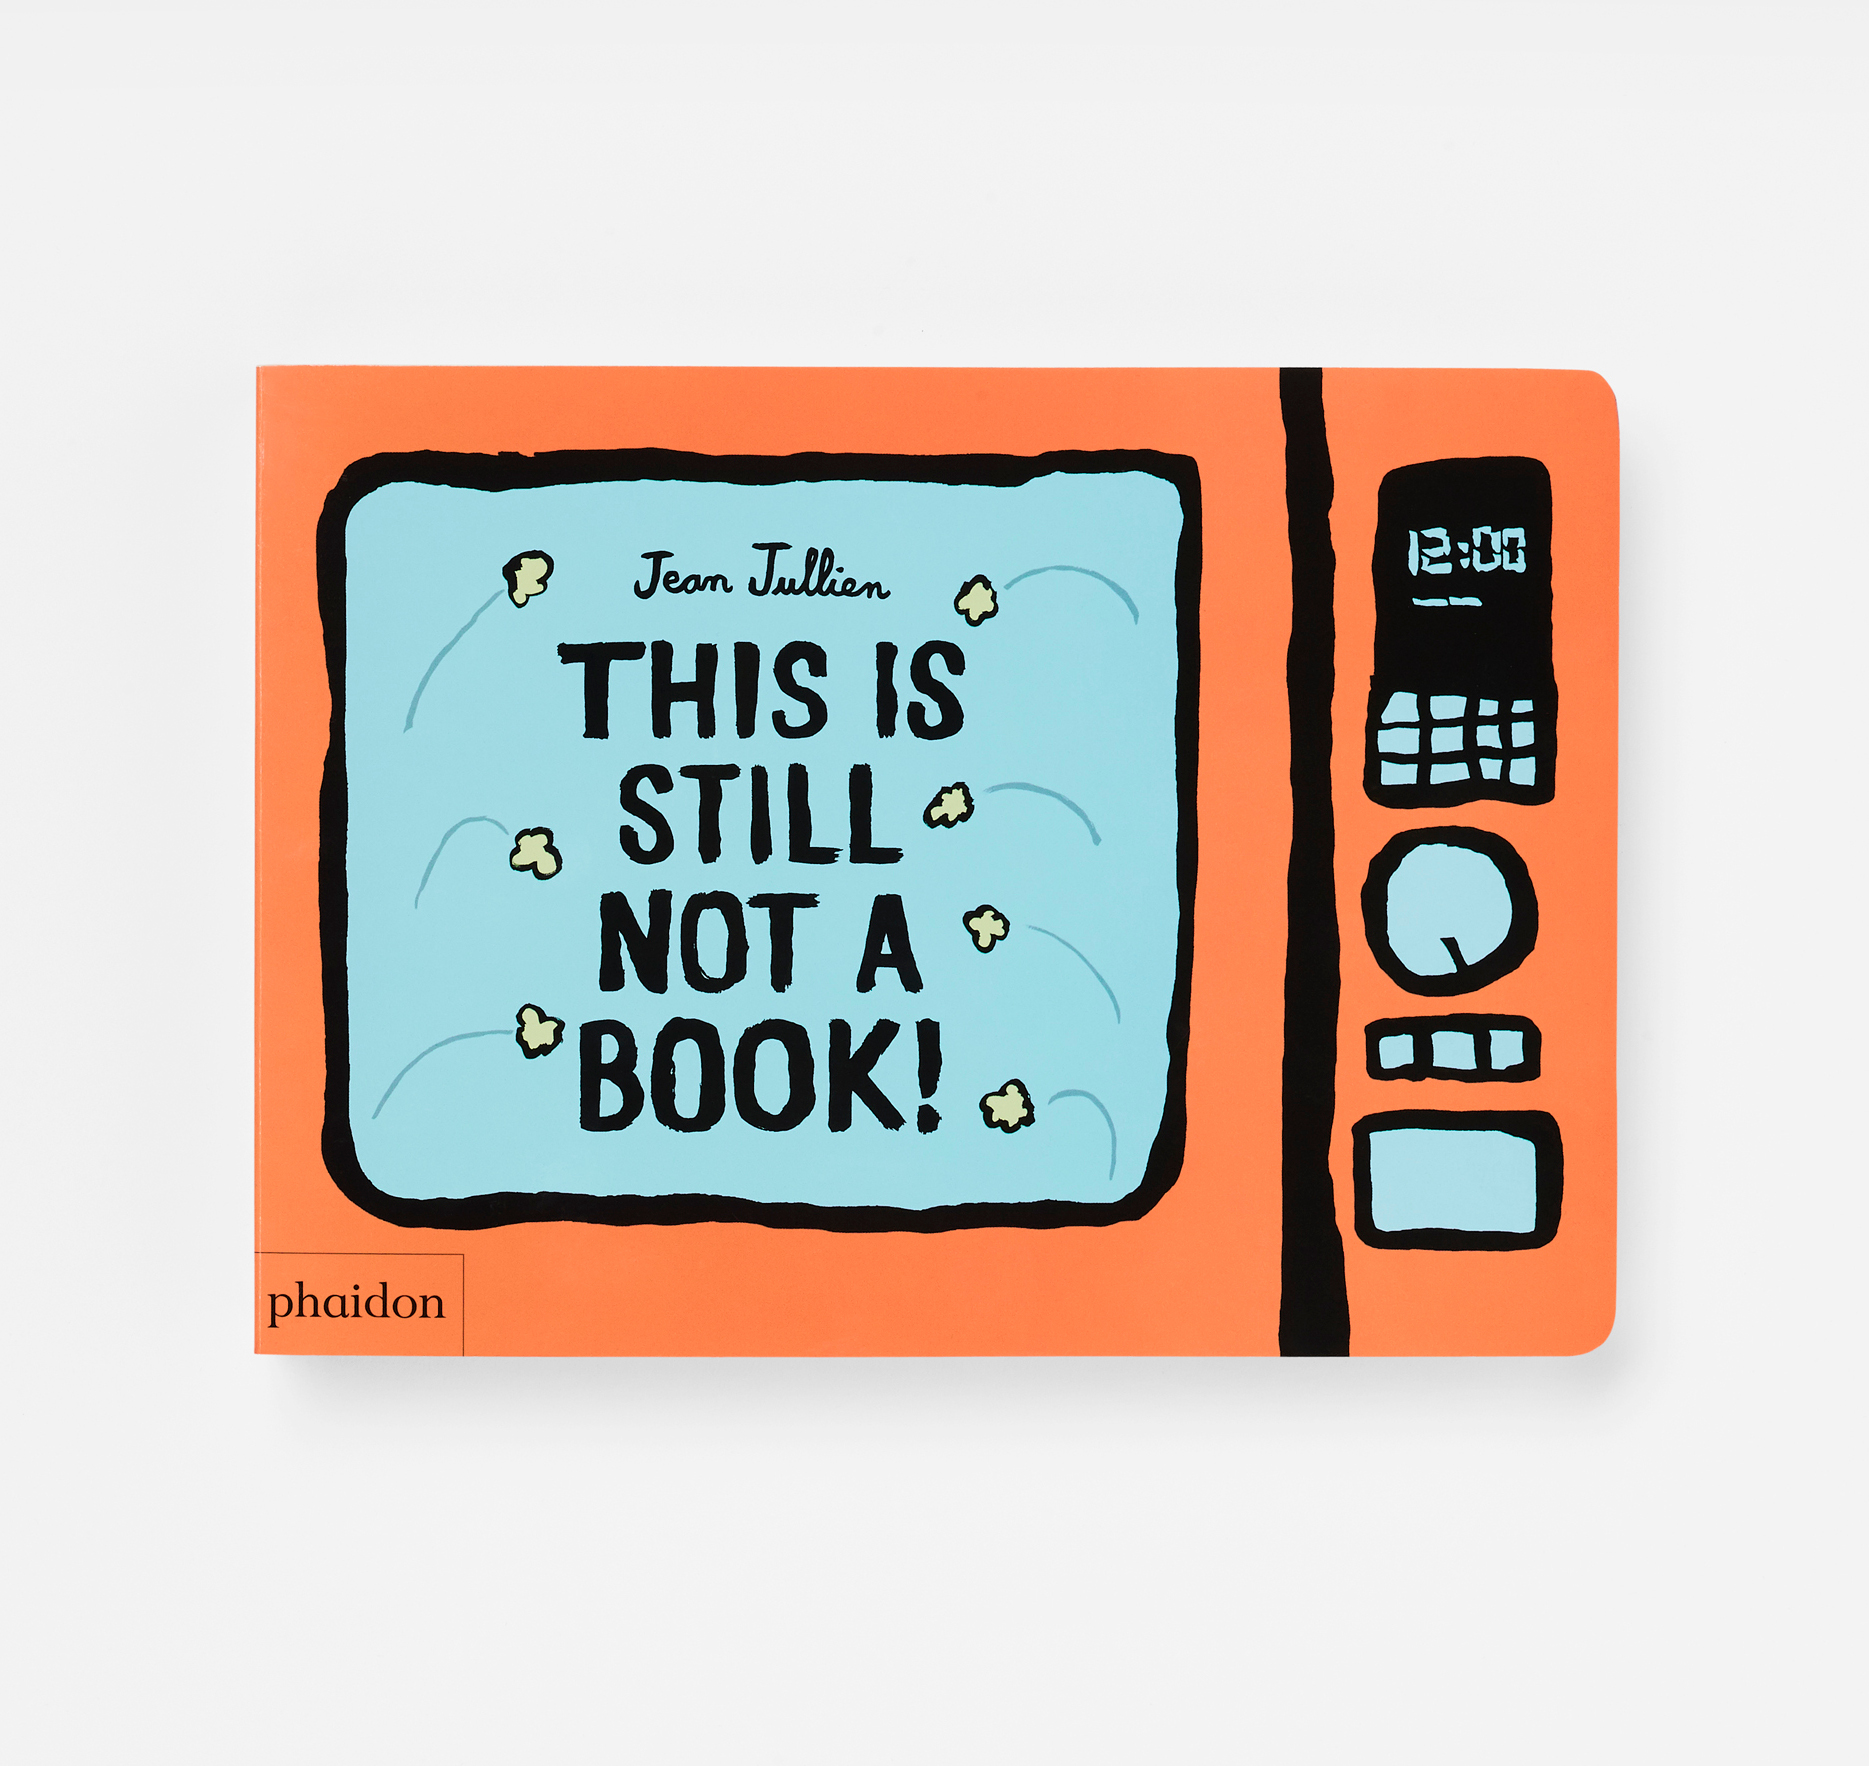 This Is Still Not A Book by Jean Jullien